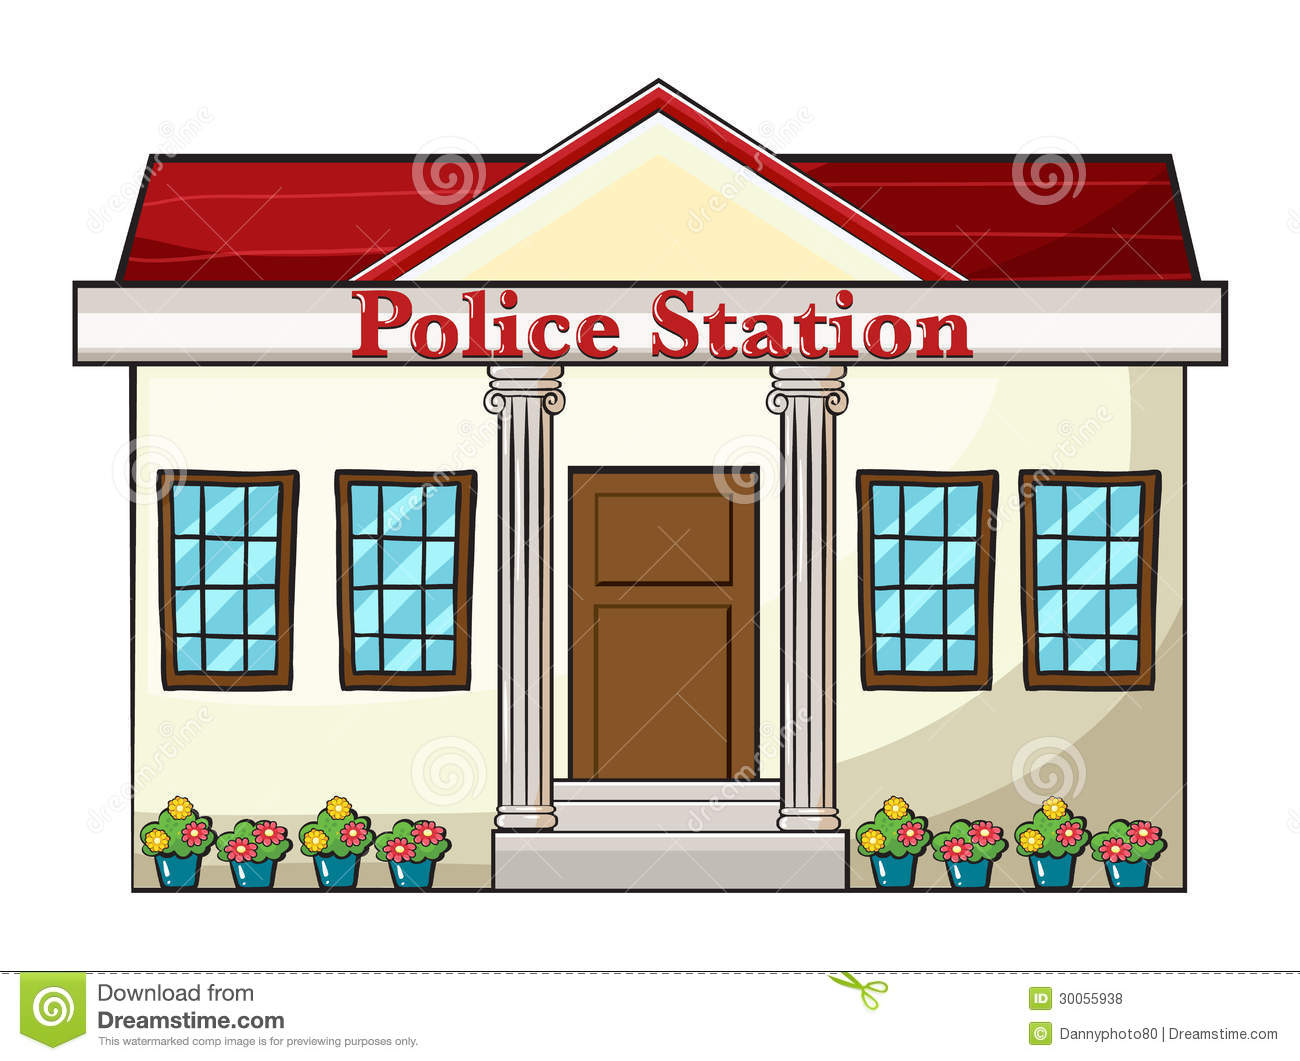 Police Station Royalty Free Stock Photos Image 30055938